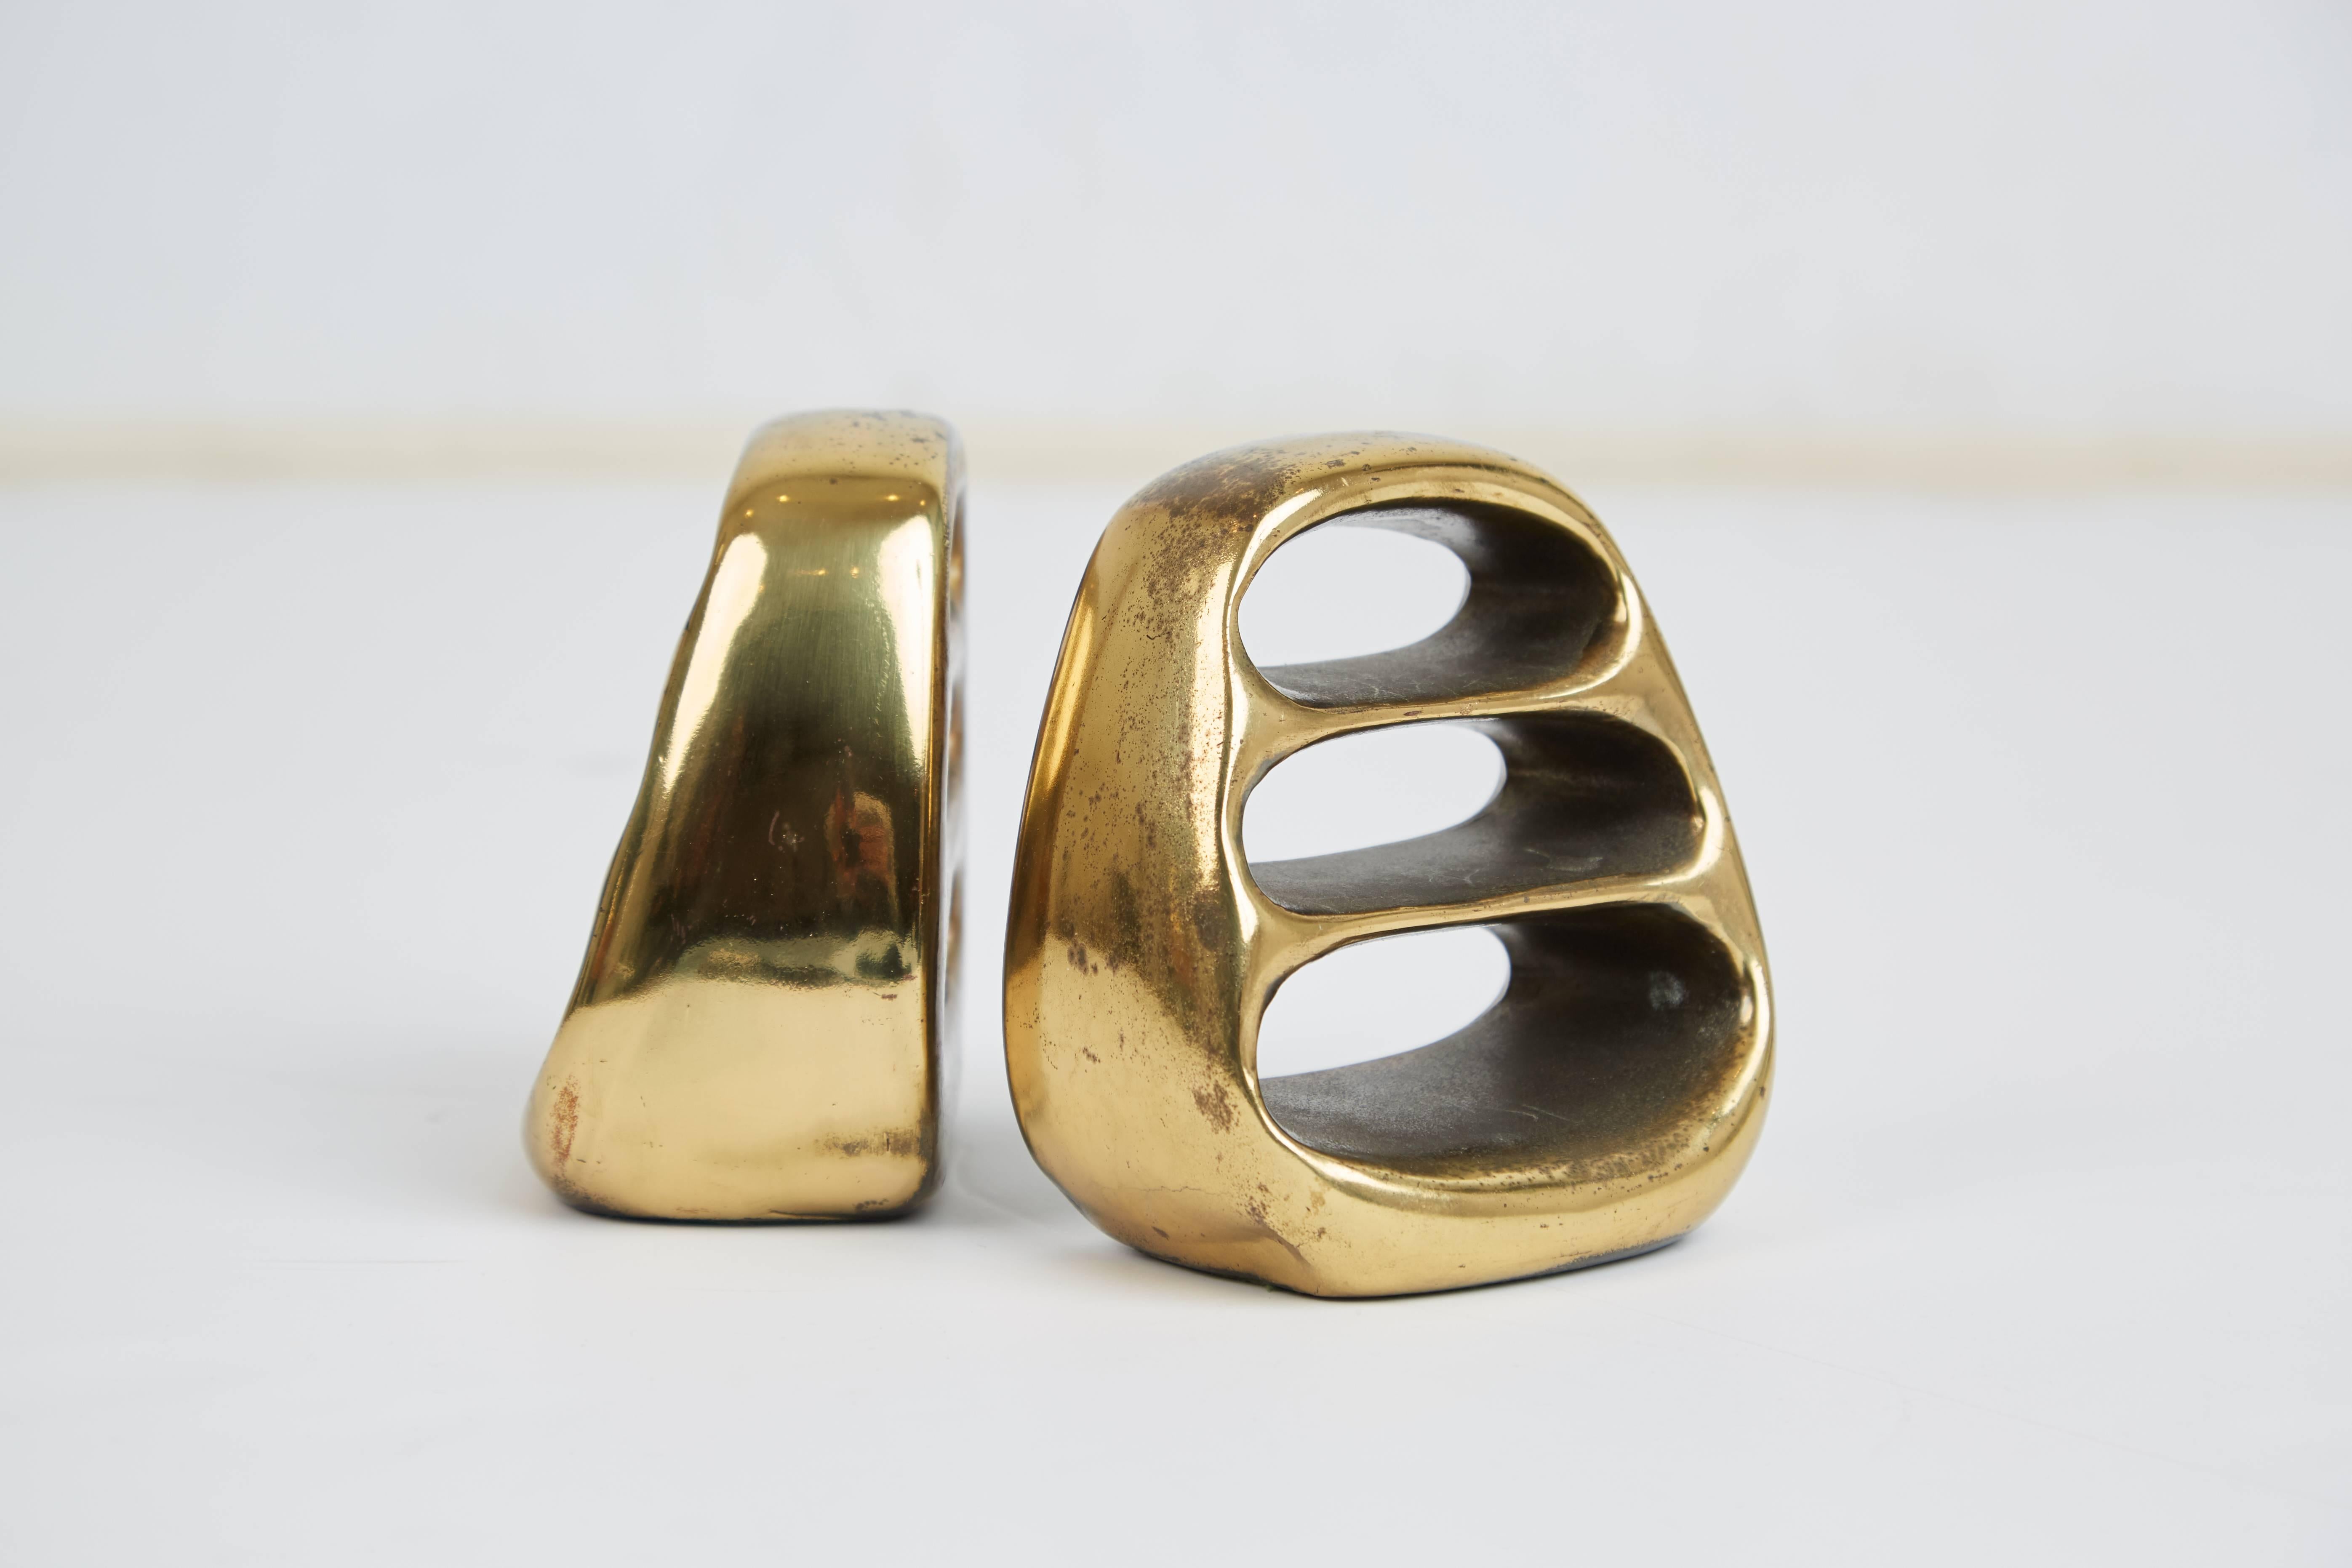 Lustrous pair of sculptural bookends in gleaming brass by Ben Seibel for Jenfred ware for Virginia Metalcrafters. This set features an admirable patina built up over time which can be highly desirable. These traces of age and use bring more vibrancy